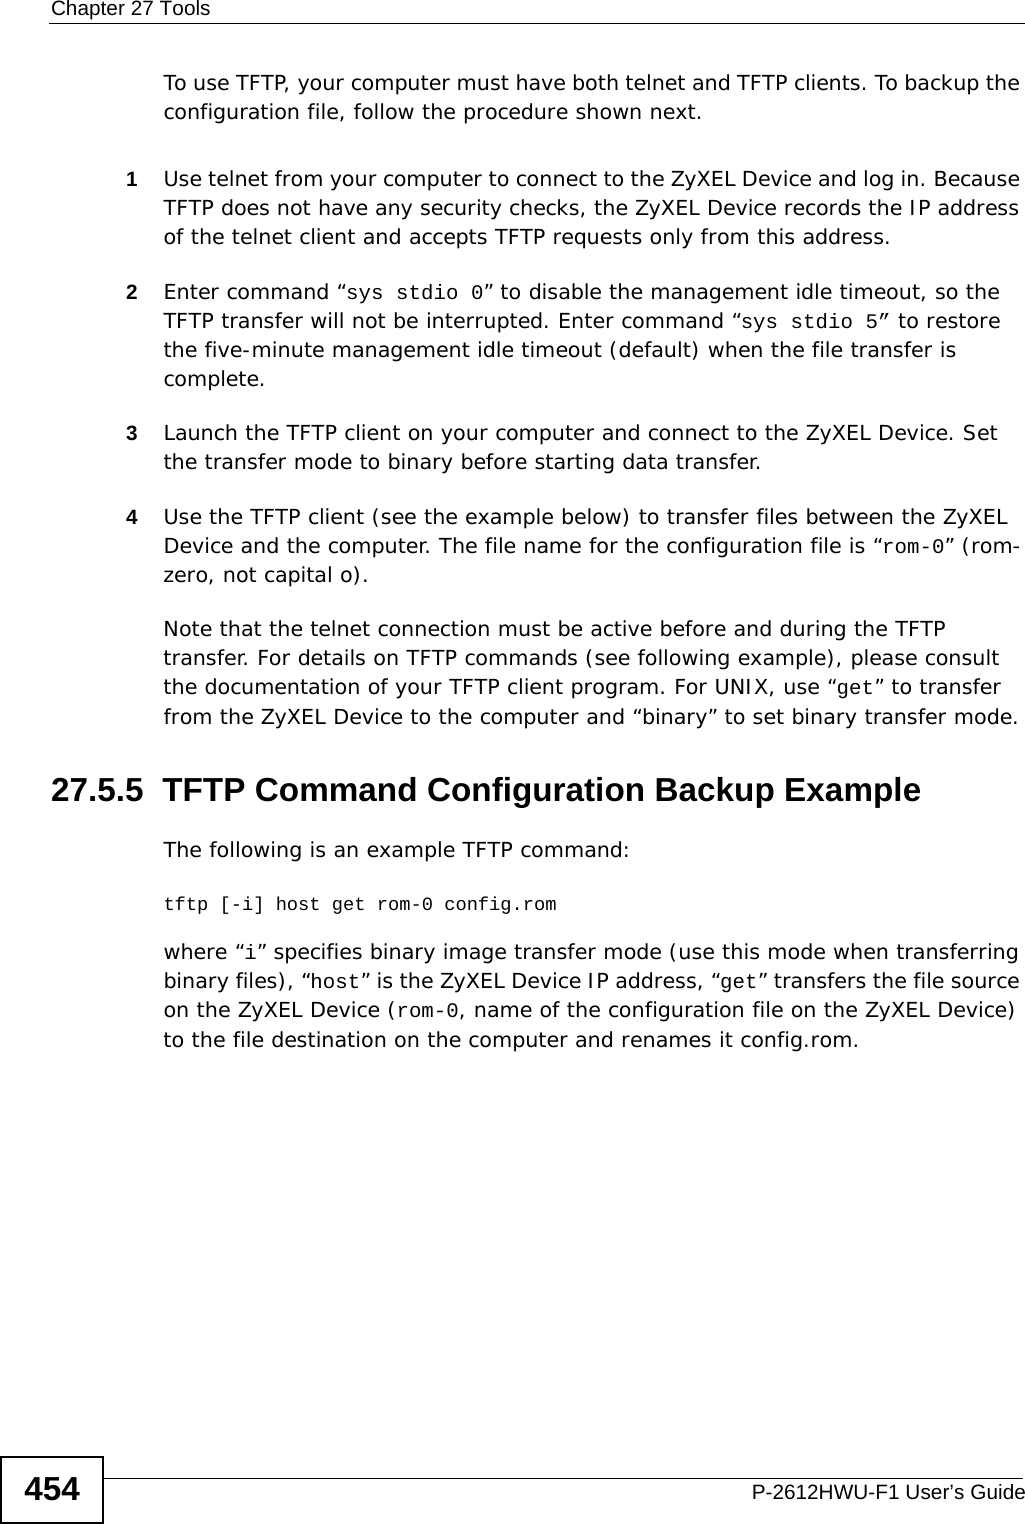 Chapter 27 ToolsP-2612HWU-F1 User’s Guide454To use TFTP, your computer must have both telnet and TFTP clients. To backup the configuration file, follow the procedure shown next.1Use telnet from your computer to connect to the ZyXEL Device and log in. Because TFTP does not have any security checks, the ZyXEL Device records the IP address of the telnet client and accepts TFTP requests only from this address.2Enter command “sys stdio 0” to disable the management idle timeout, so the TFTP transfer will not be interrupted. Enter command “sys stdio 5” to restore the five-minute management idle timeout (default) when the file transfer is complete.3Launch the TFTP client on your computer and connect to the ZyXEL Device. Set the transfer mode to binary before starting data transfer.4Use the TFTP client (see the example below) to transfer files between the ZyXEL Device and the computer. The file name for the configuration file is “rom-0” (rom-zero, not capital o).Note that the telnet connection must be active before and during the TFTP transfer. For details on TFTP commands (see following example), please consult the documentation of your TFTP client program. For UNIX, use “get” to transfer from the ZyXEL Device to the computer and “binary” to set binary transfer mode.27.5.5  TFTP Command Configuration Backup ExampleThe following is an example TFTP command:tftp [-i] host get rom-0 config.romwhere “i” specifies binary image transfer mode (use this mode when transferring binary files), “host” is the ZyXEL Device IP address, “get” transfers the file source on the ZyXEL Device (rom-0, name of the configuration file on the ZyXEL Device) to the file destination on the computer and renames it config.rom.